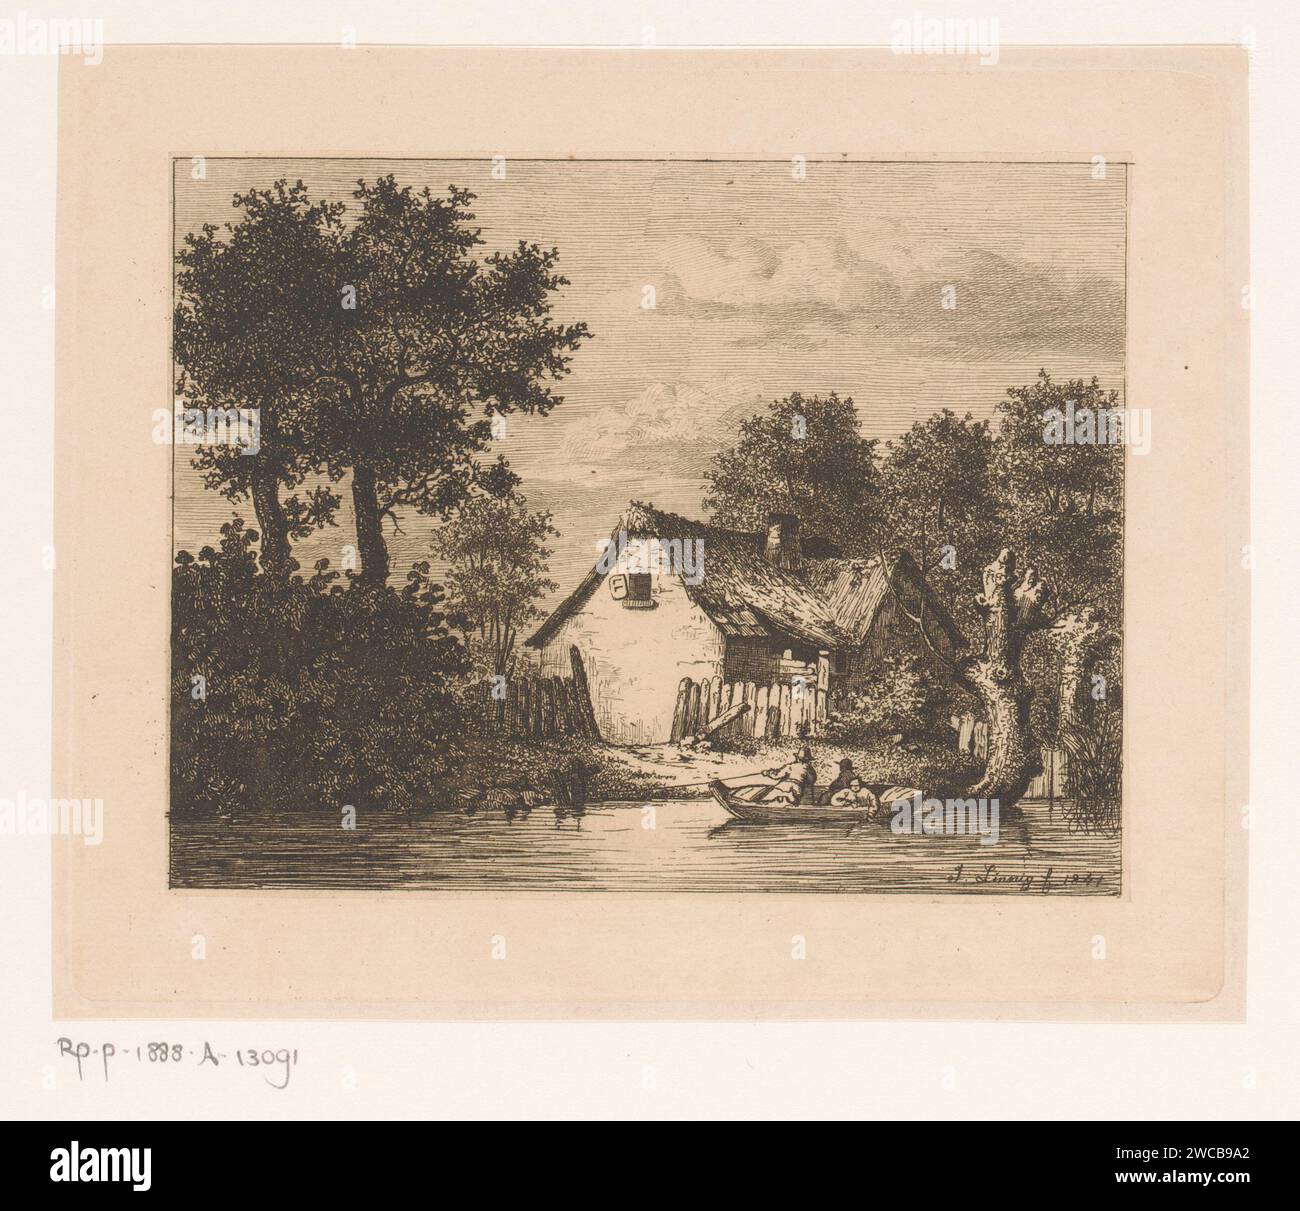 Rowing boat on a river for a farm in Wetteren, Jean Théodore Joseph Linnig, 1841 print   paper. etching rowing-boat, canoe, etc.. farm or solitary house in landscape Wetteren Stock Photo